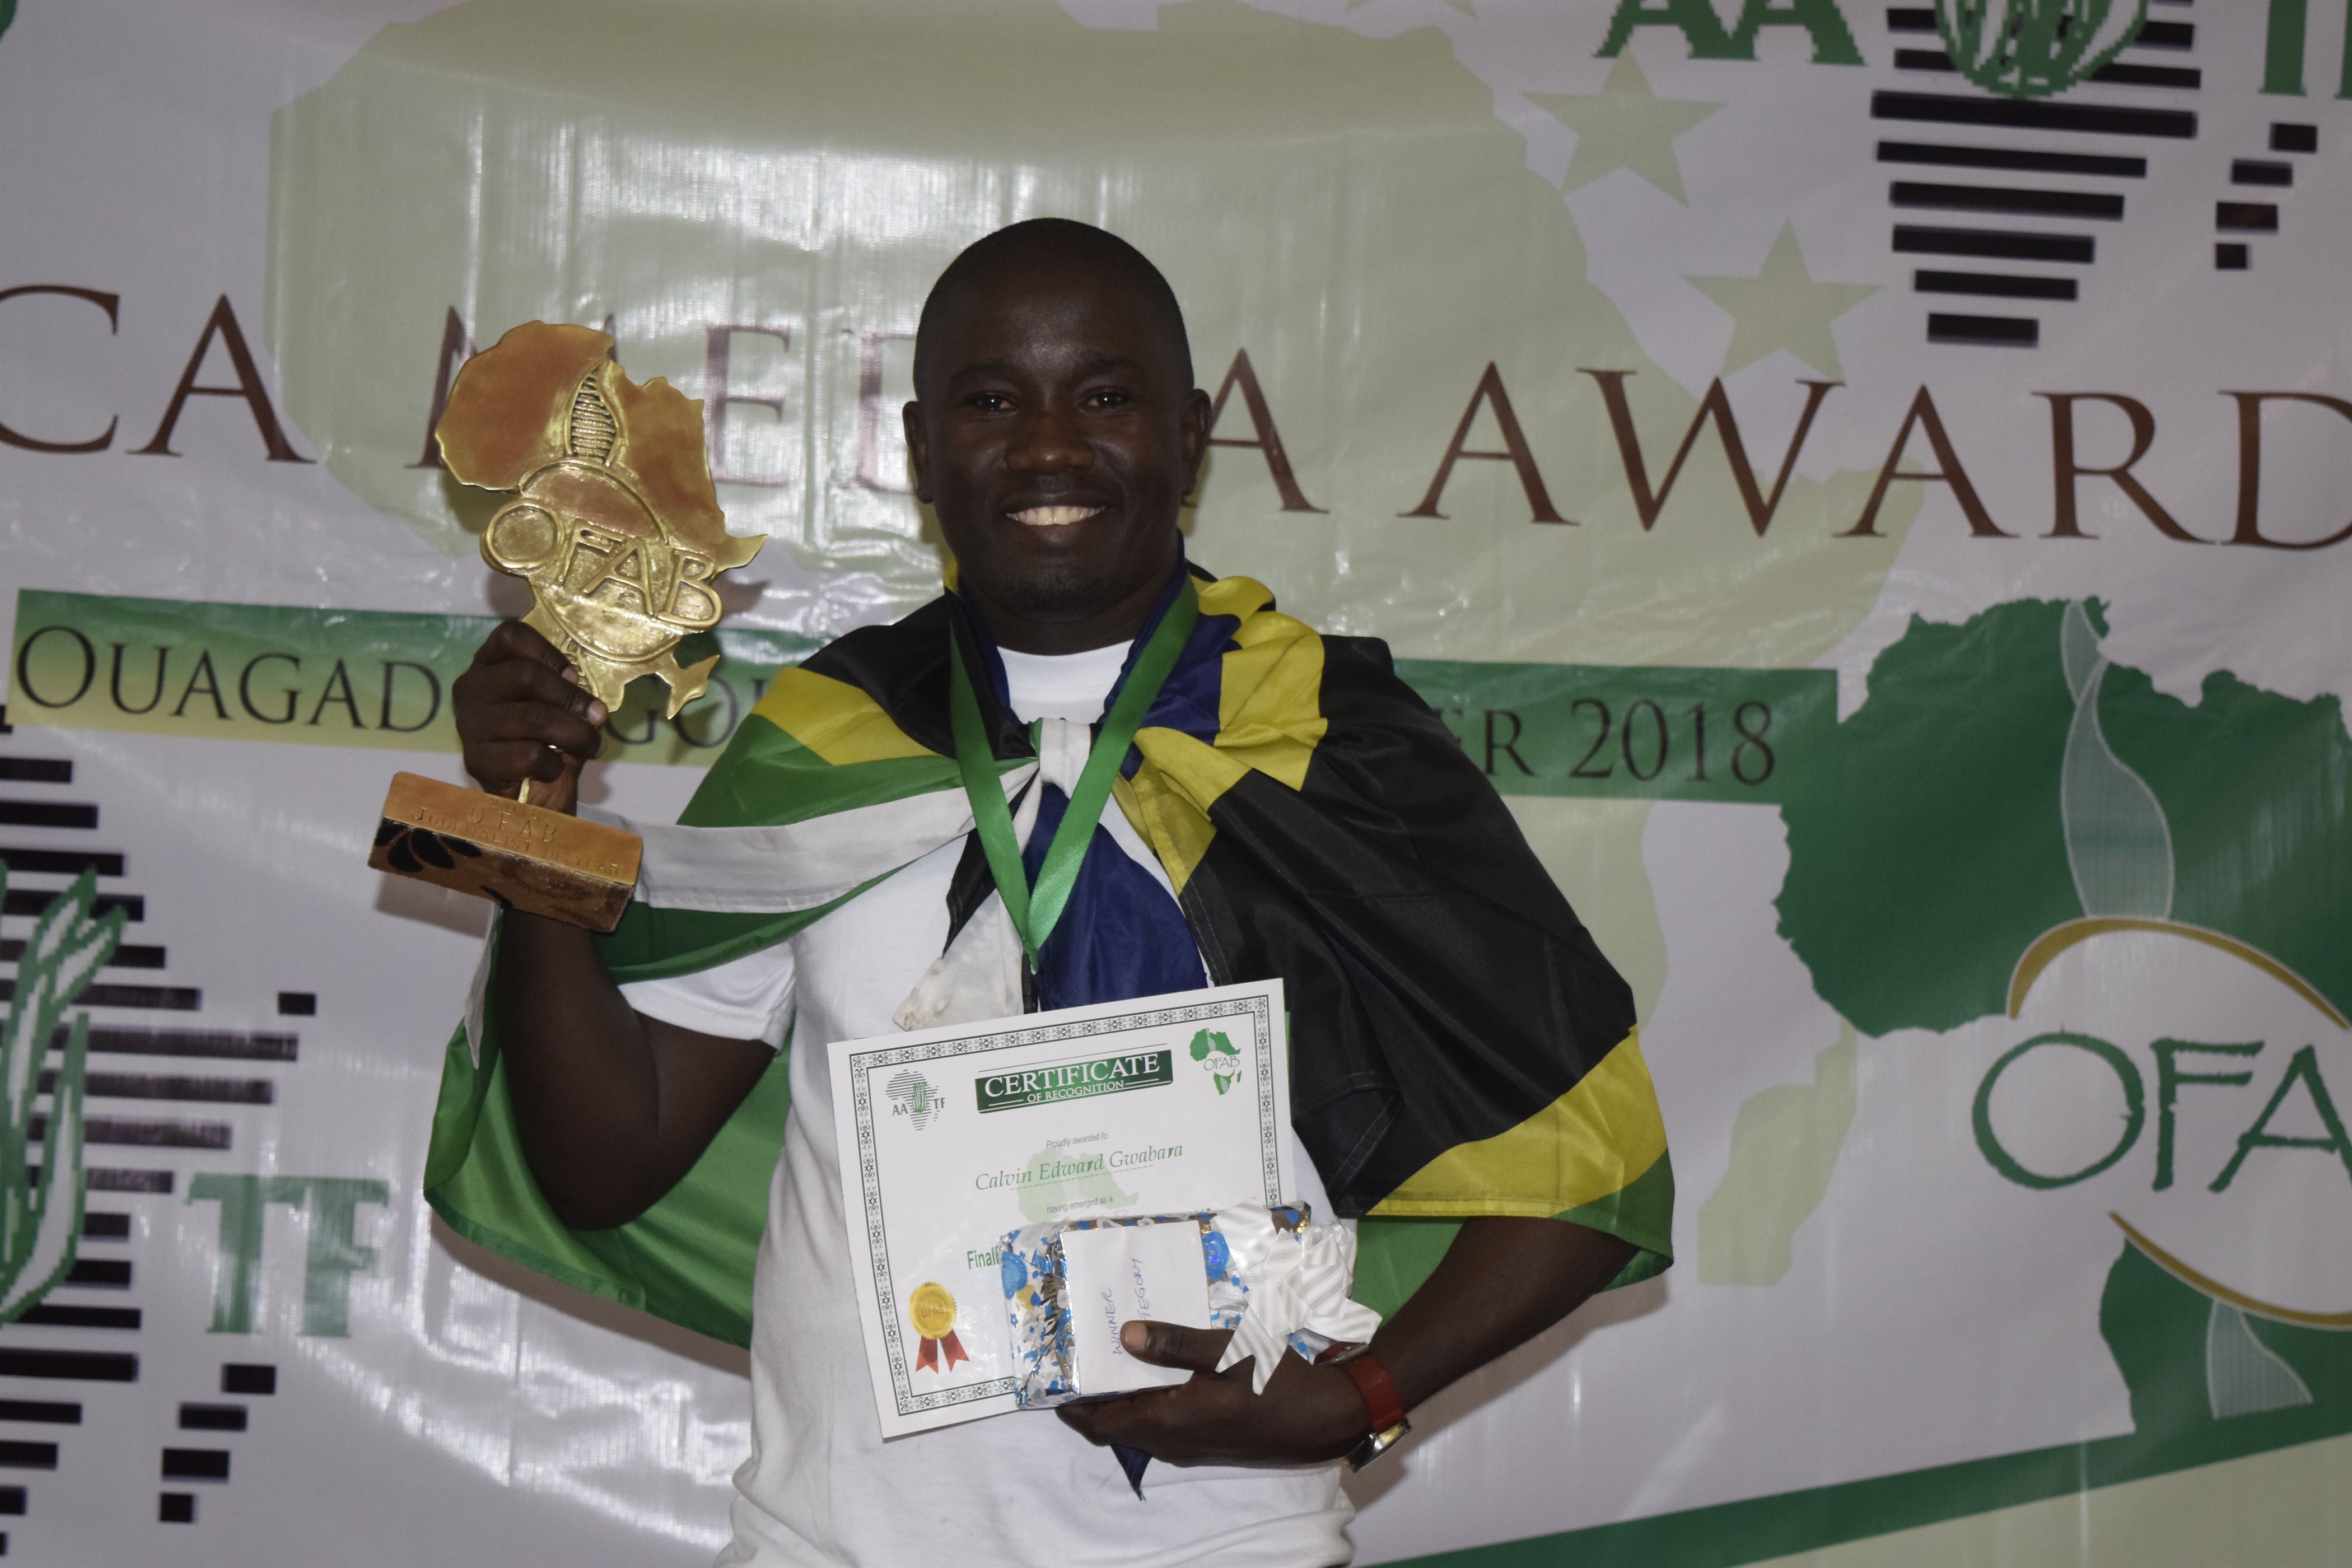 Mr Calvin Gwabara Displaying Awards and Certificates after emerged the winner of the Open Forum on Agriculture Biotechnology (OFAB) Africa Media Awards, 2018.